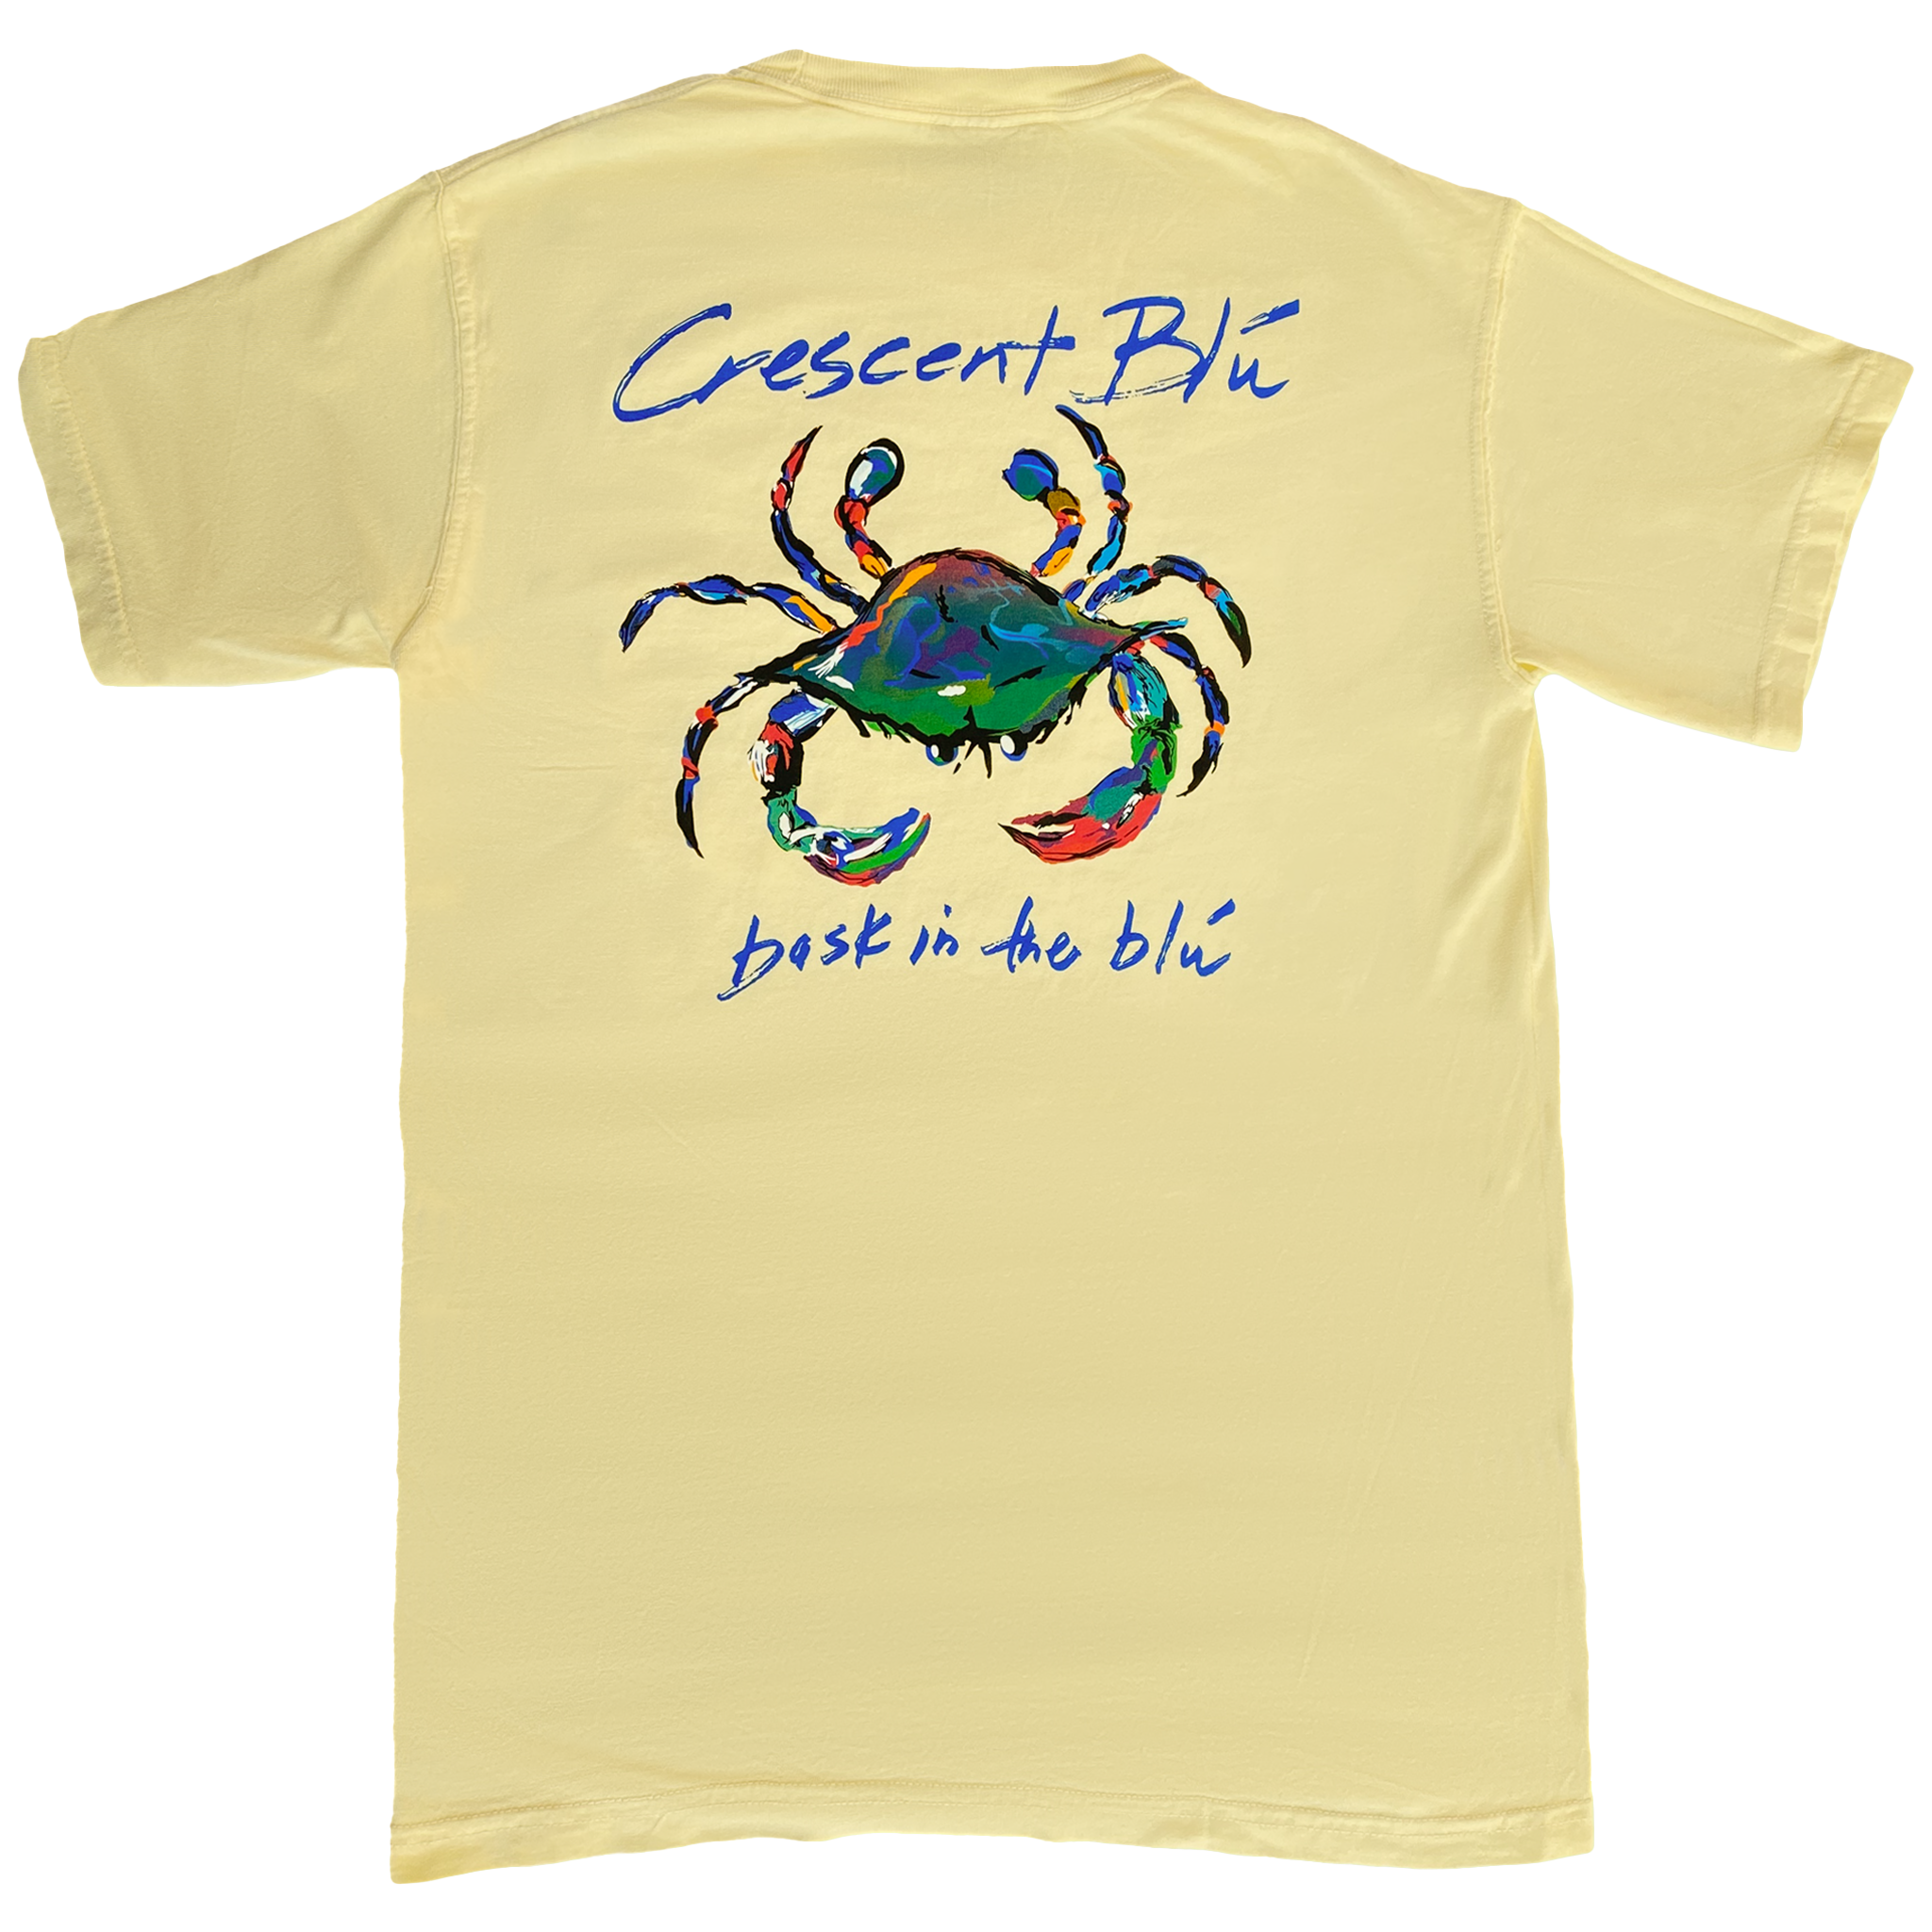 Yellow T-shirt with large multi-colored Crescent Blu crab logo short sleeves, back of shirt